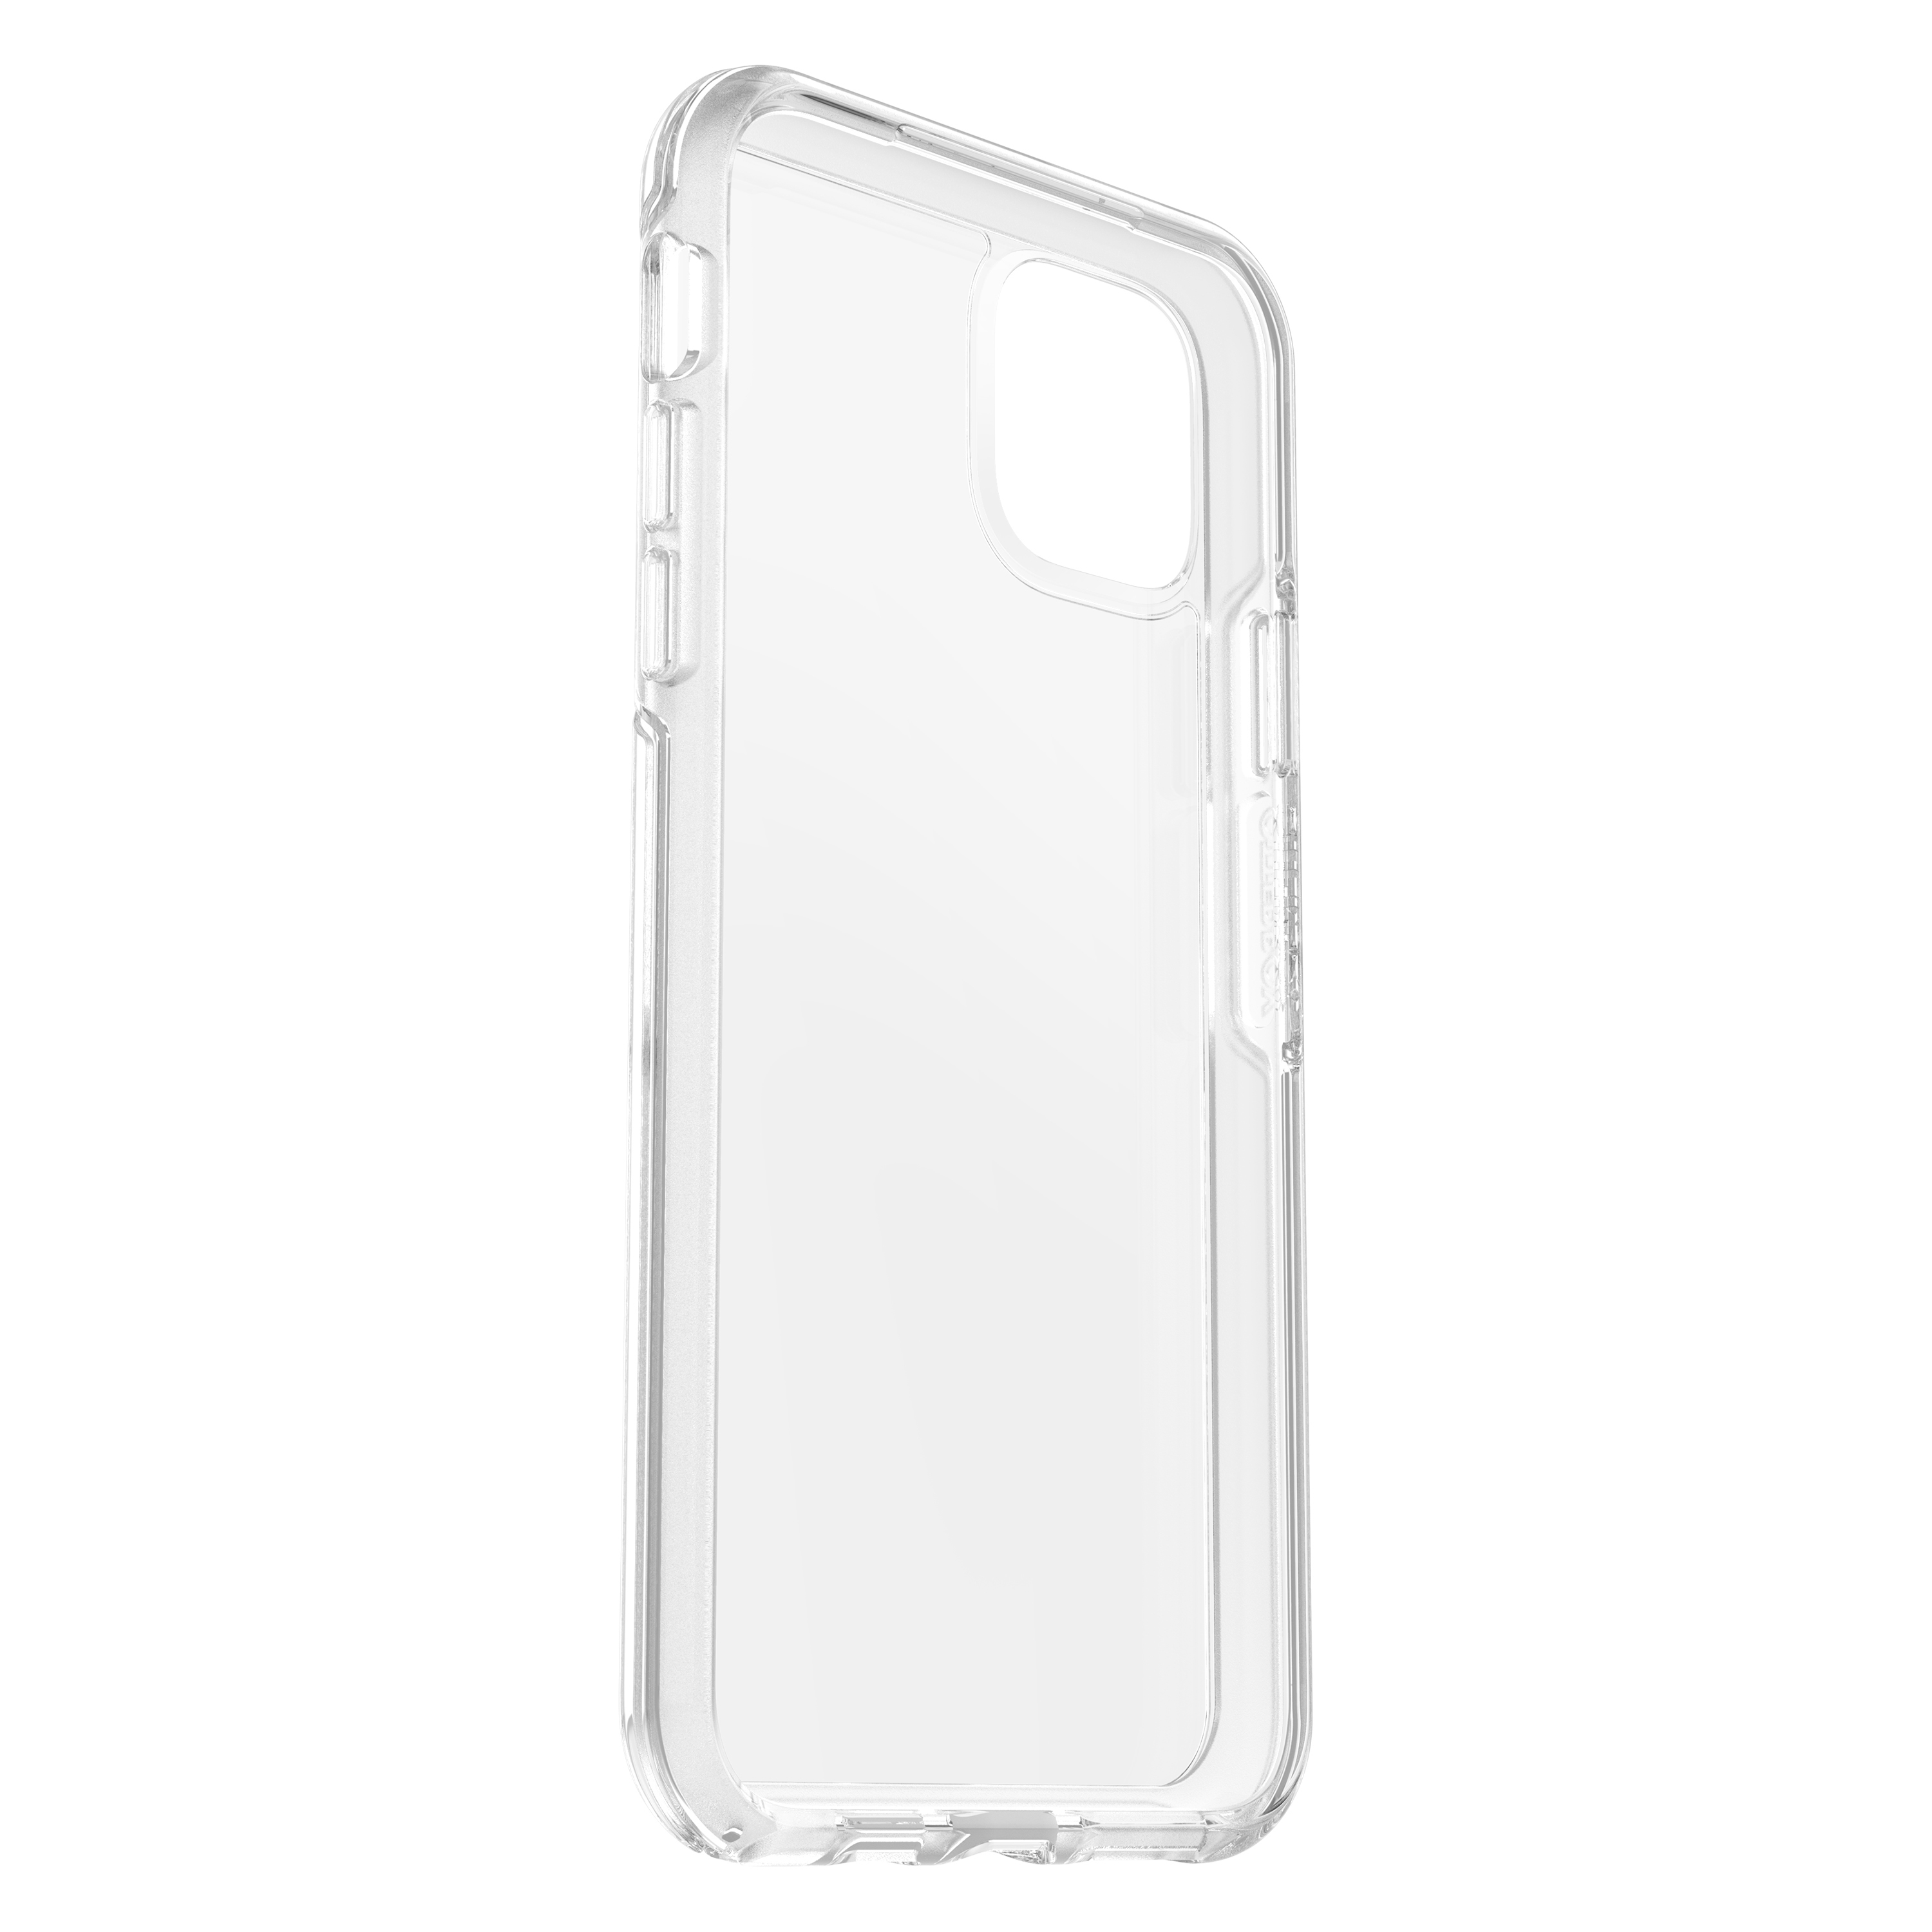 Backcover, Symmetry Clear, Apple, iPhone Max, OTTERBOX 11 Pro Transparent